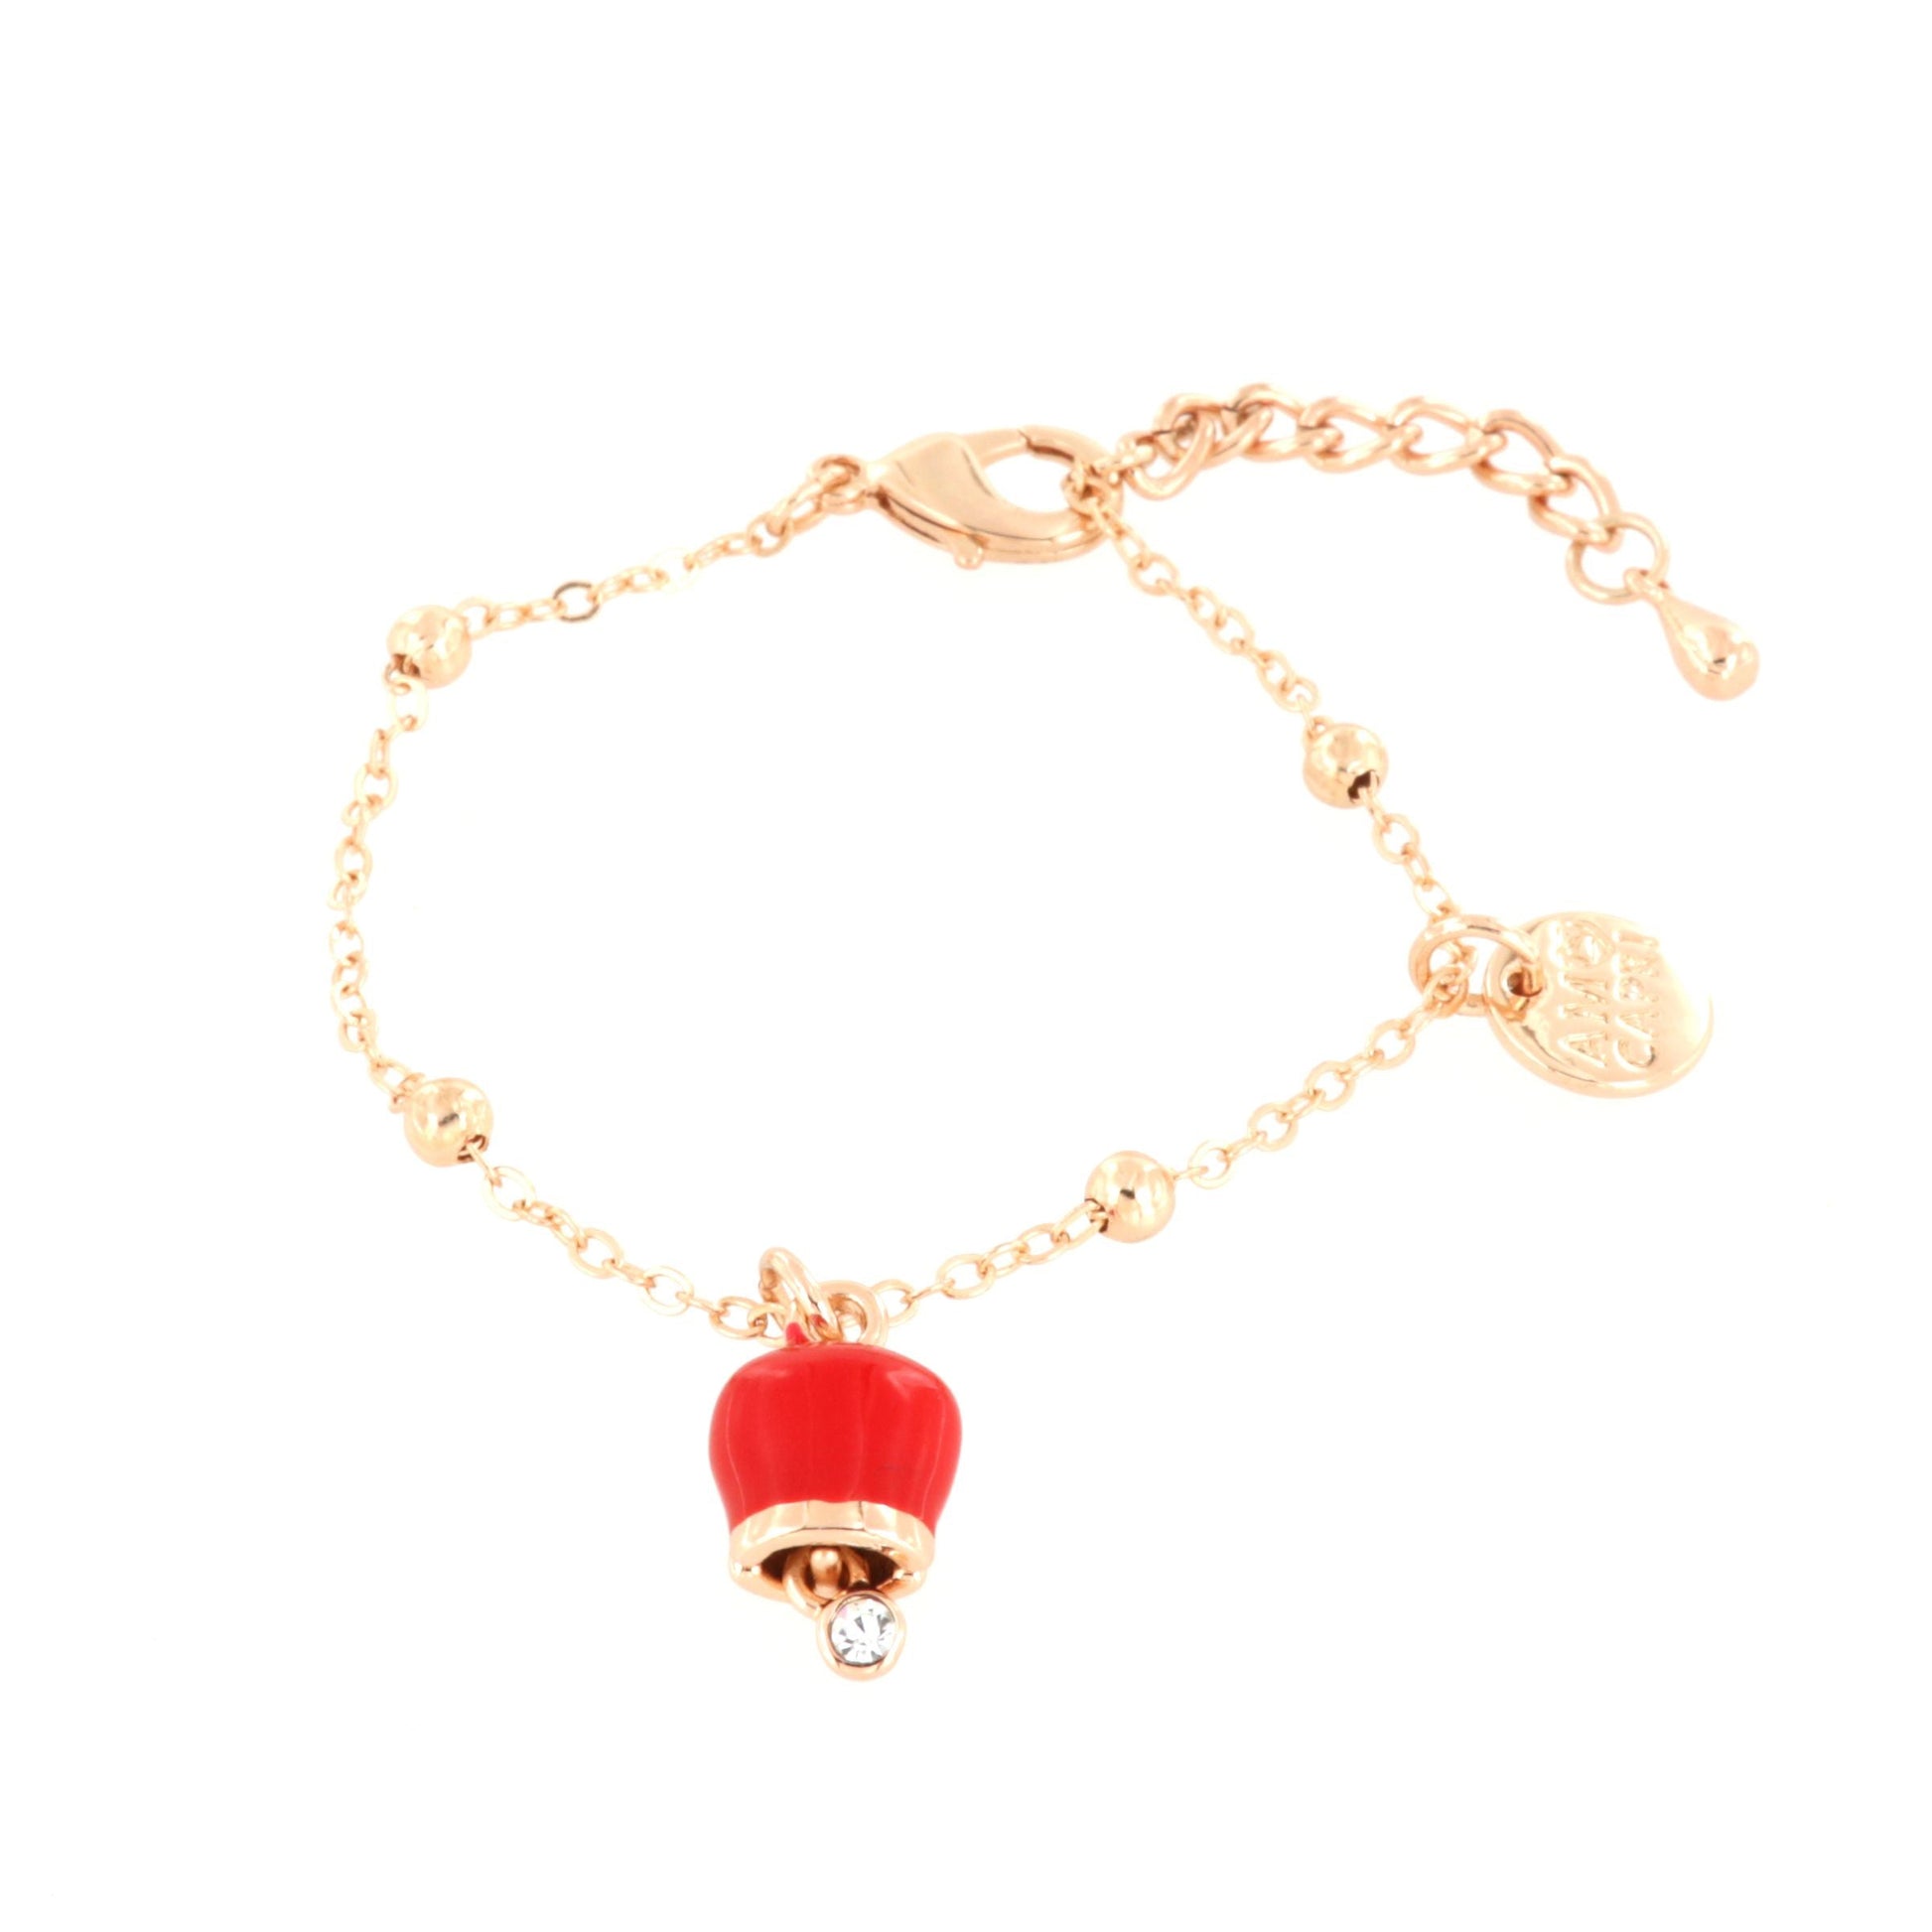 Metal bracelet with pendant charm bell, embellished with red enamel and light point